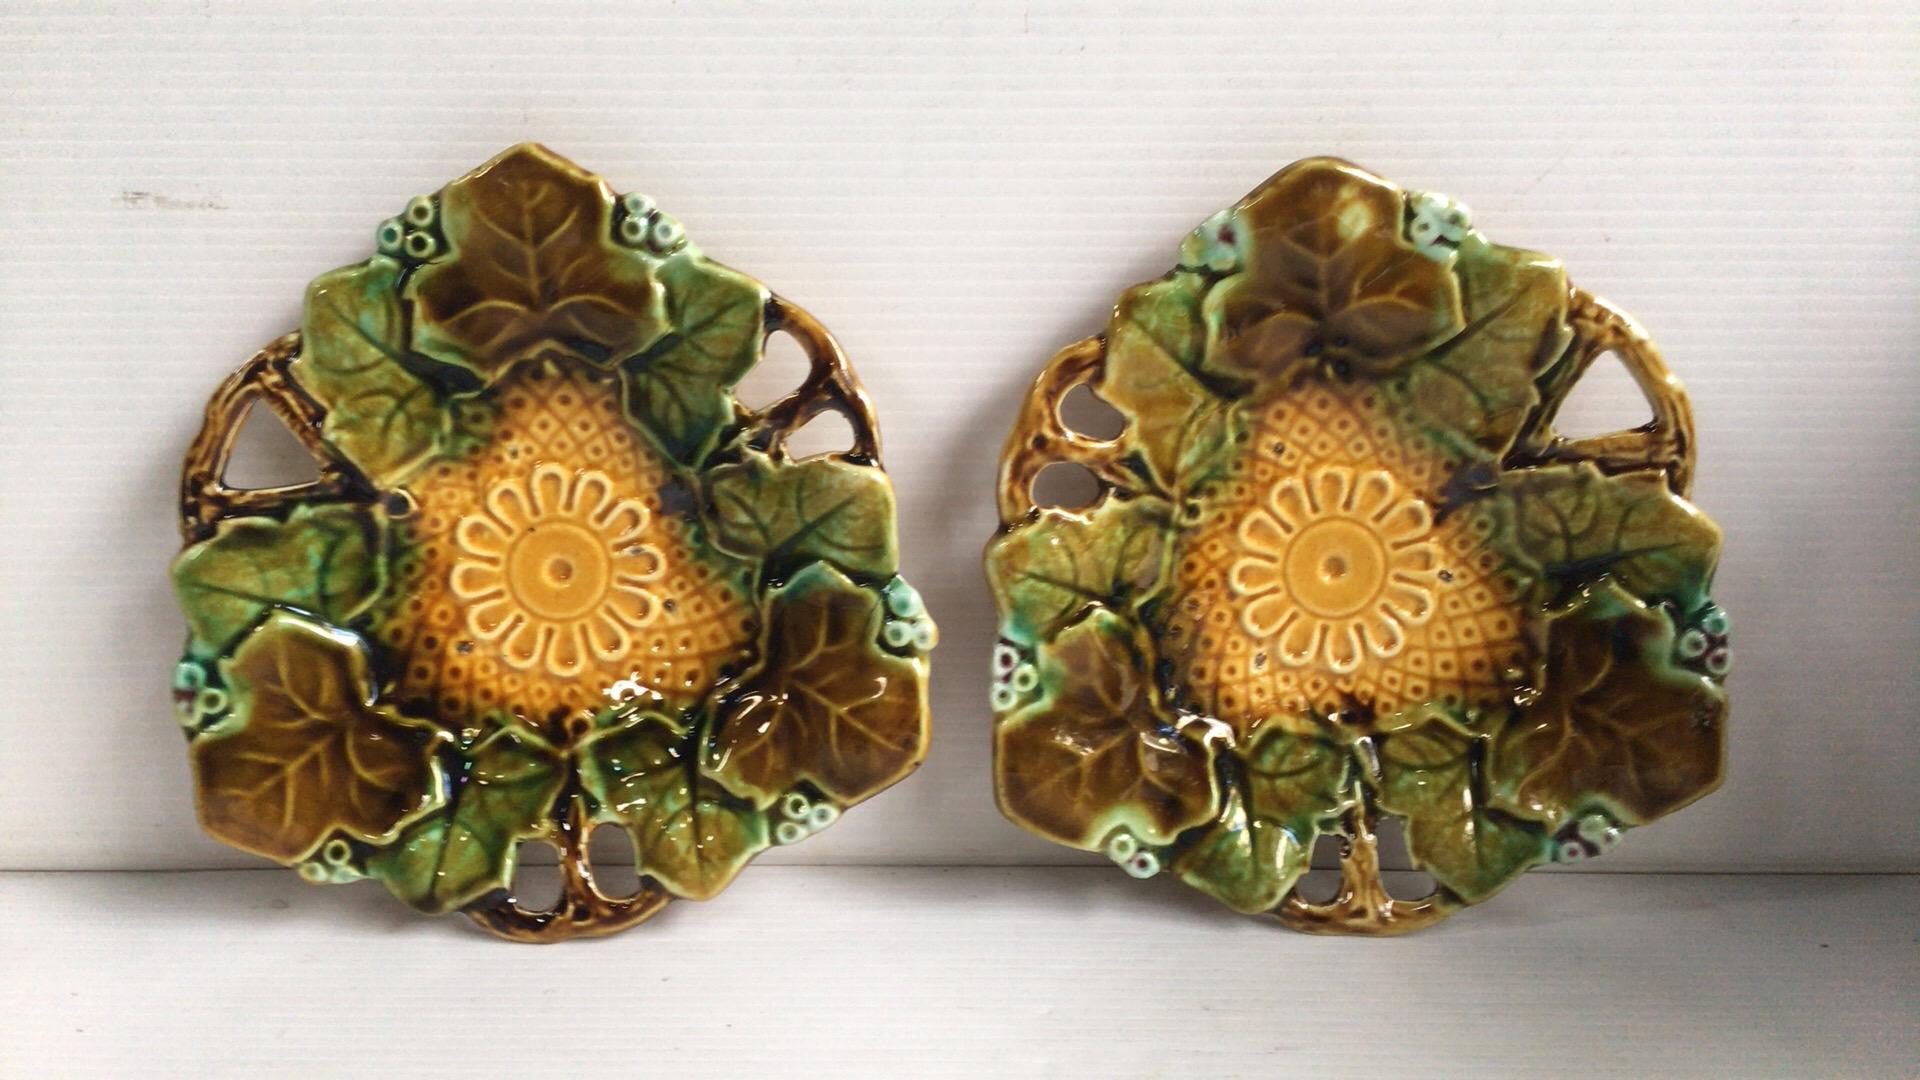 French Majolica small dish with leaves, circa 1880.
Measures: 6 inches by 6 inches.